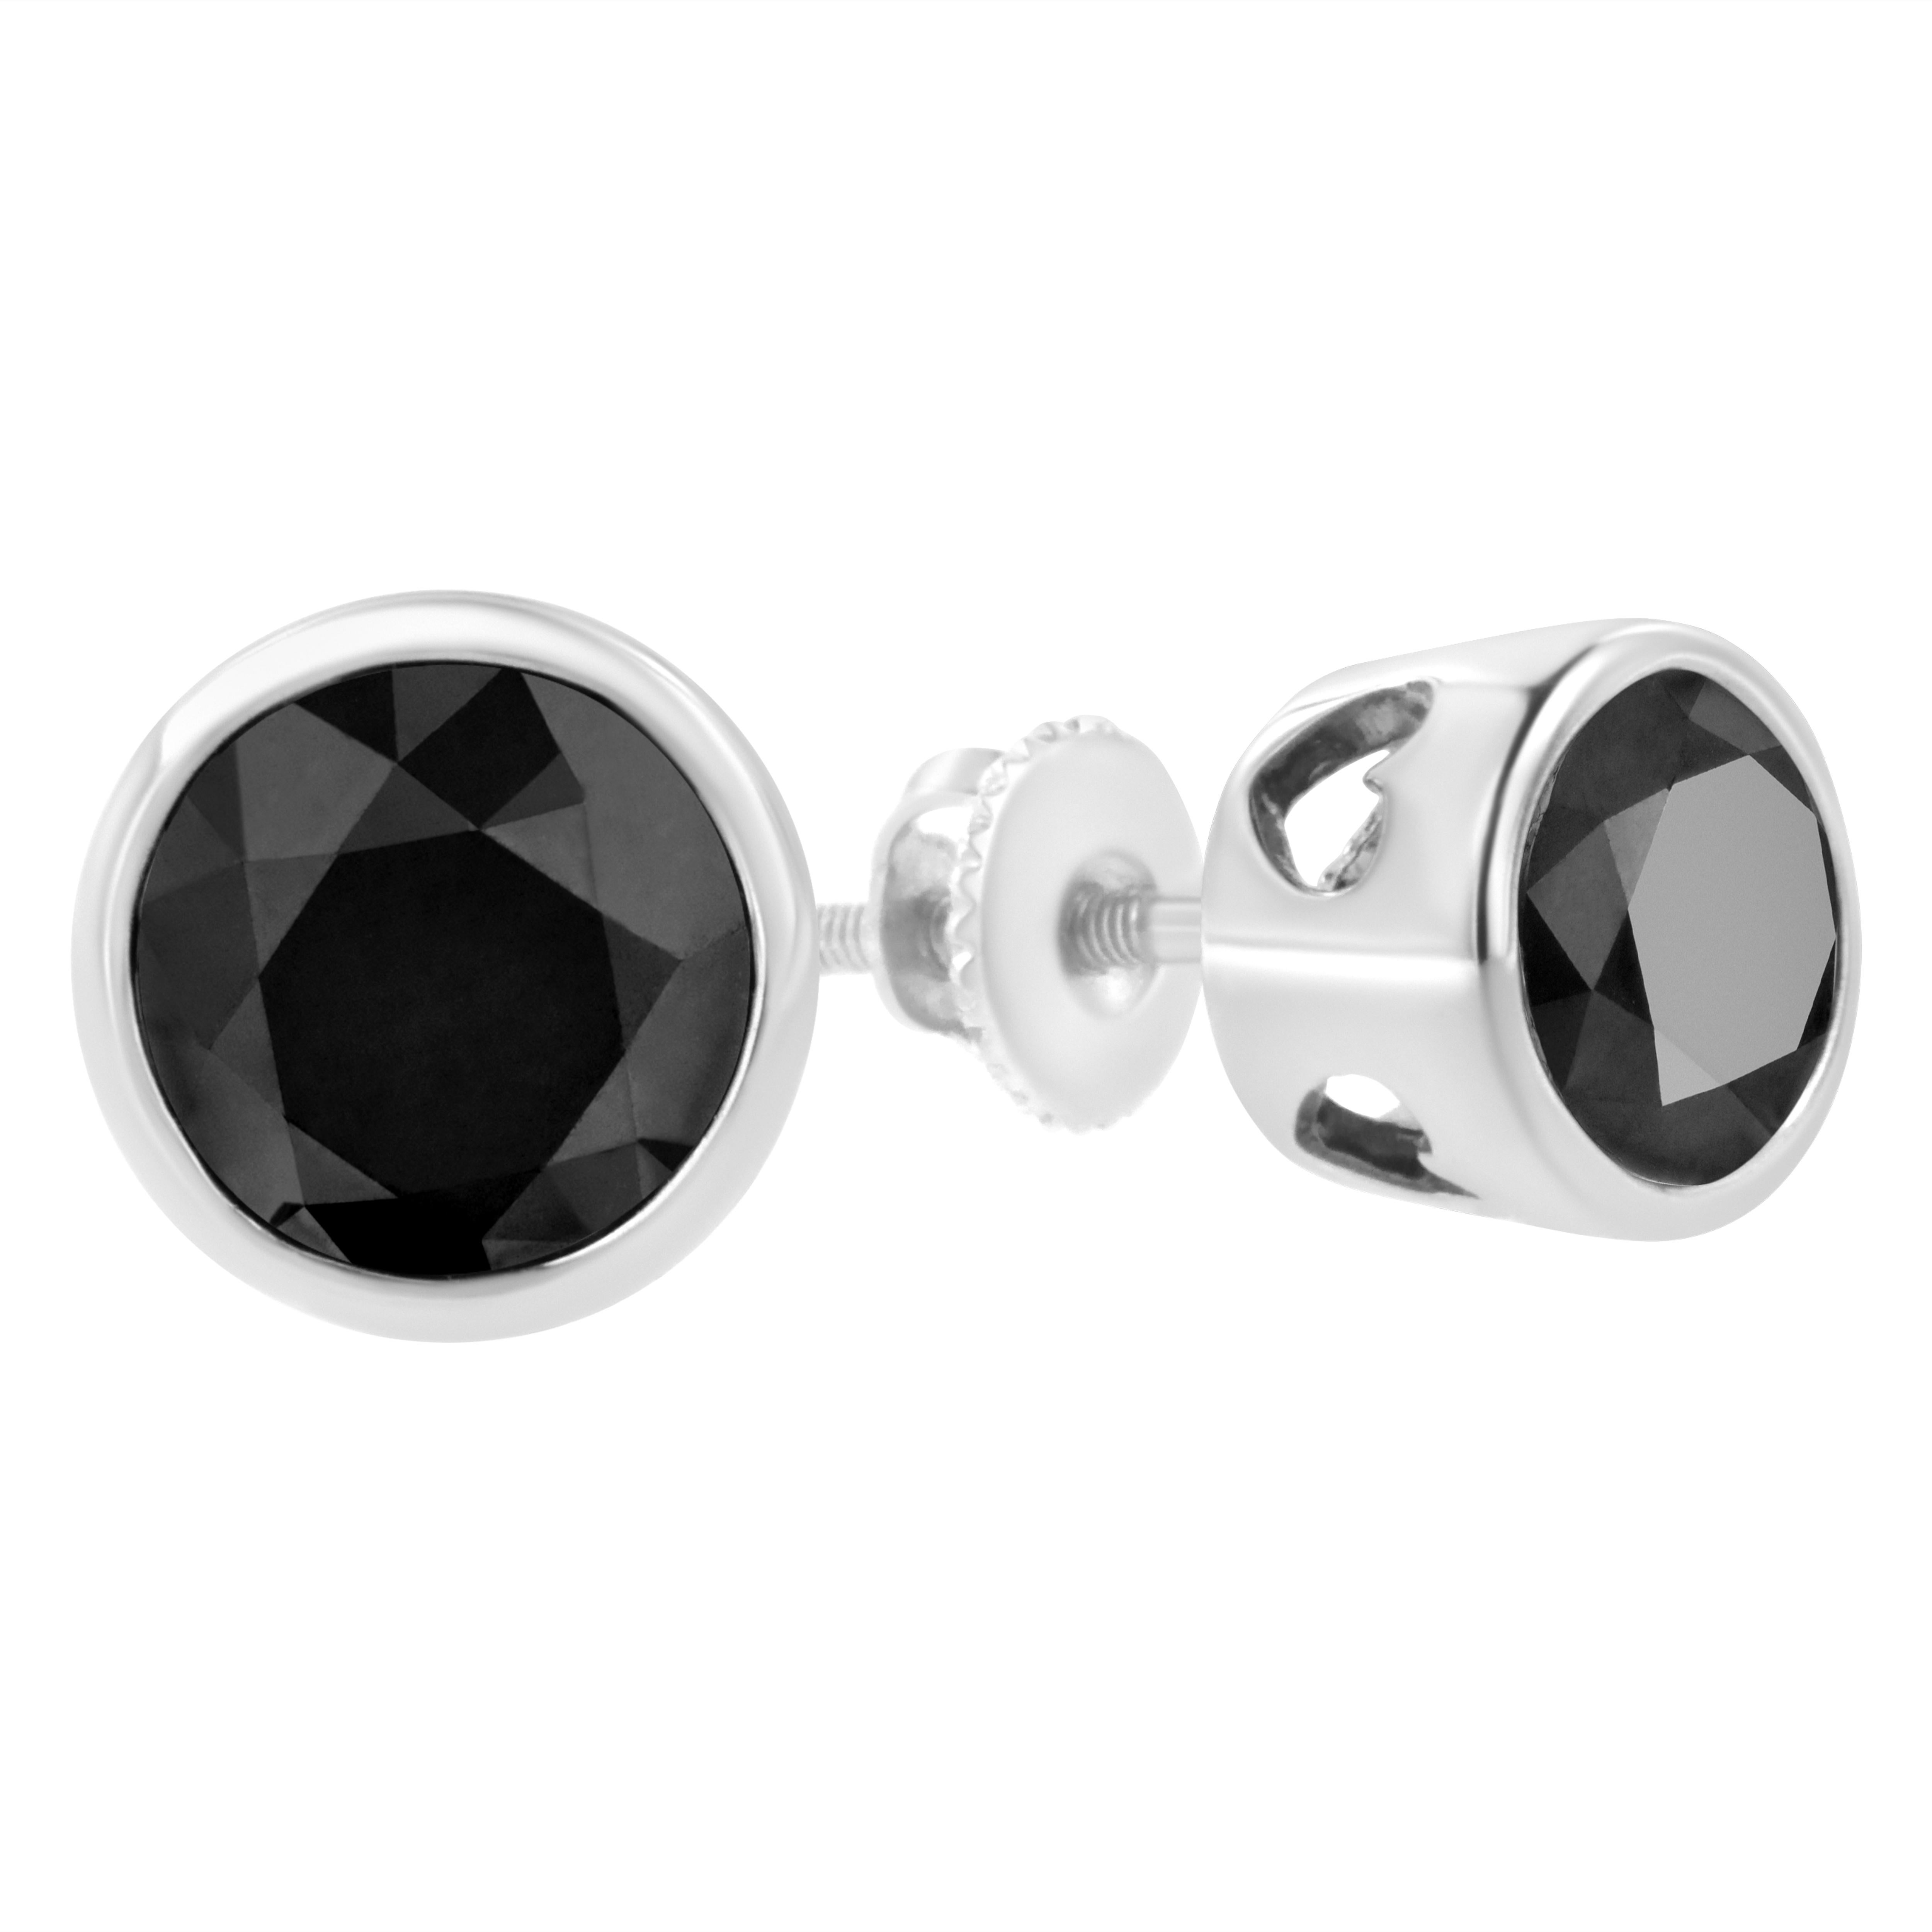 Add this stunningly unique diamond stud earrings to your jewelry collection and impress all your girlfriends. This beautiful pair of treated black studs are made from the finest .925 sterling silver, and is embellished with treated, Black round-cut